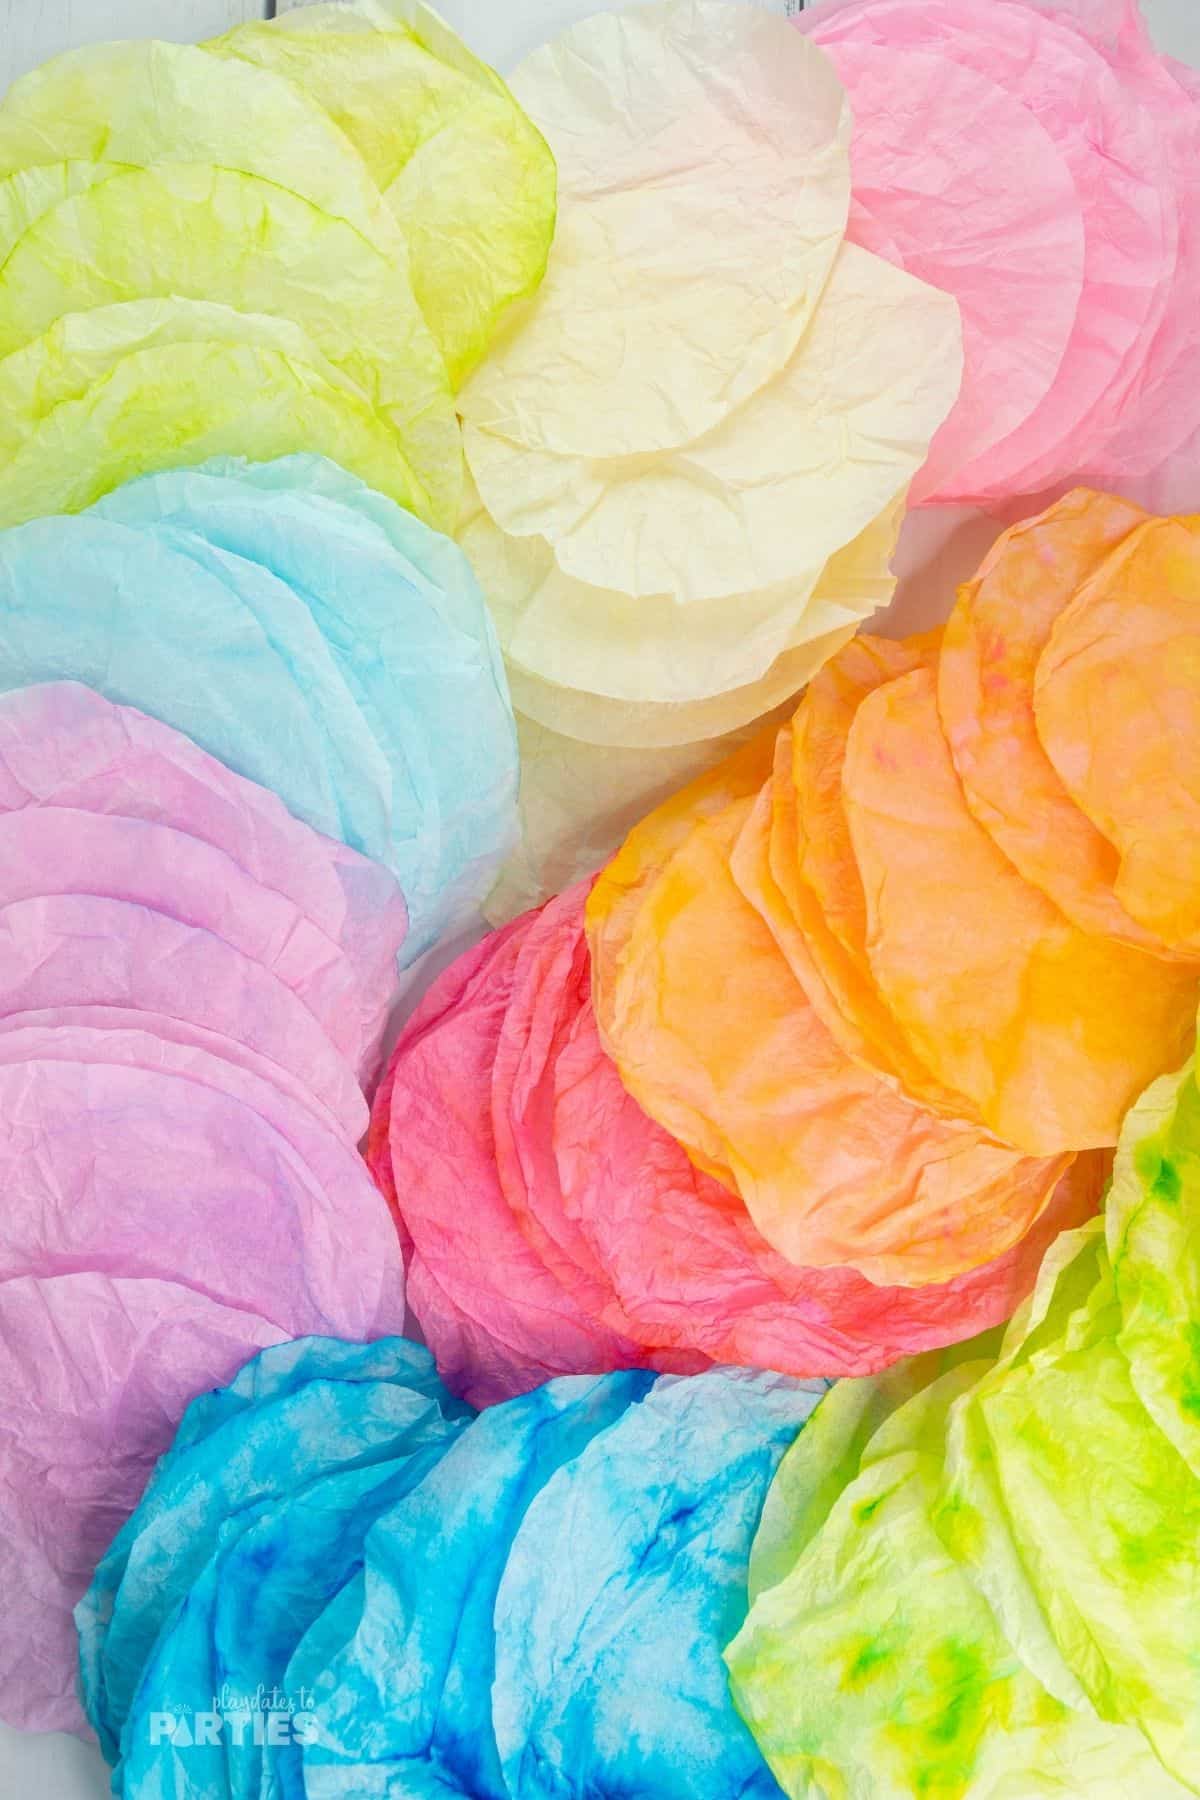 Many colorful dyed coffee filters spread out on a flat surface.